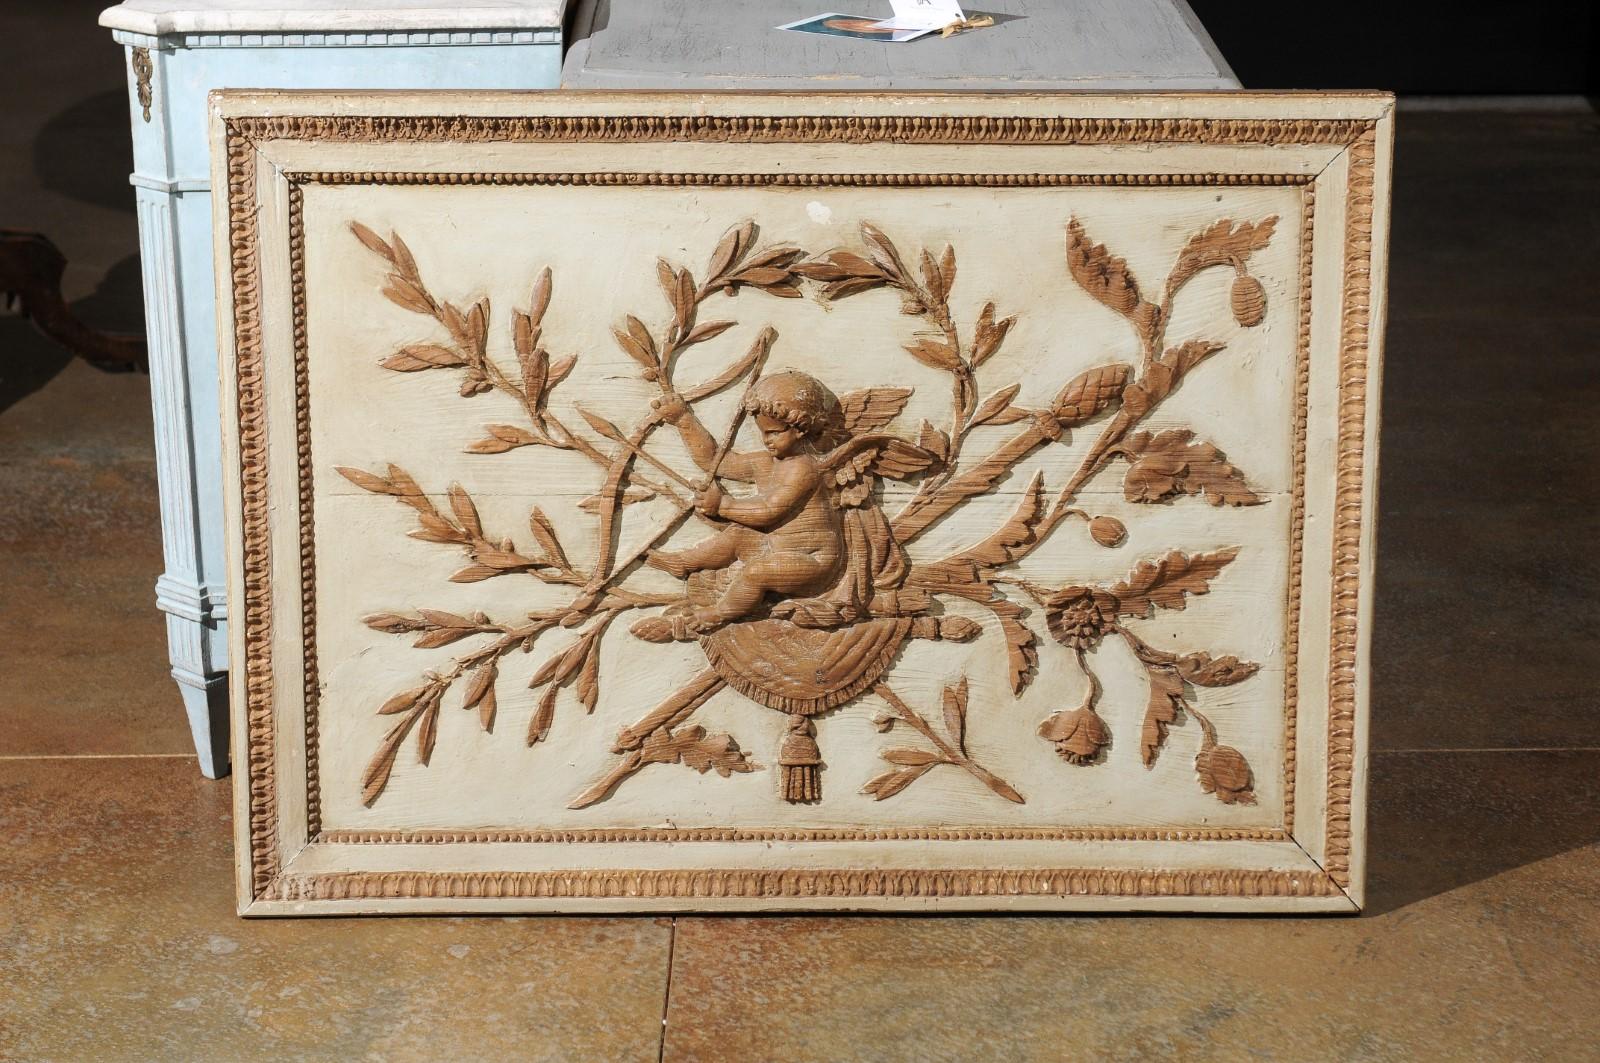 A French Louis XVI period low-relief carved and painted wooden panel from the late 18th century, with cherub and foliage. Born in France during the later years of the 18th century, this exquisite wooden wall panel attracts our eye with its skilfully